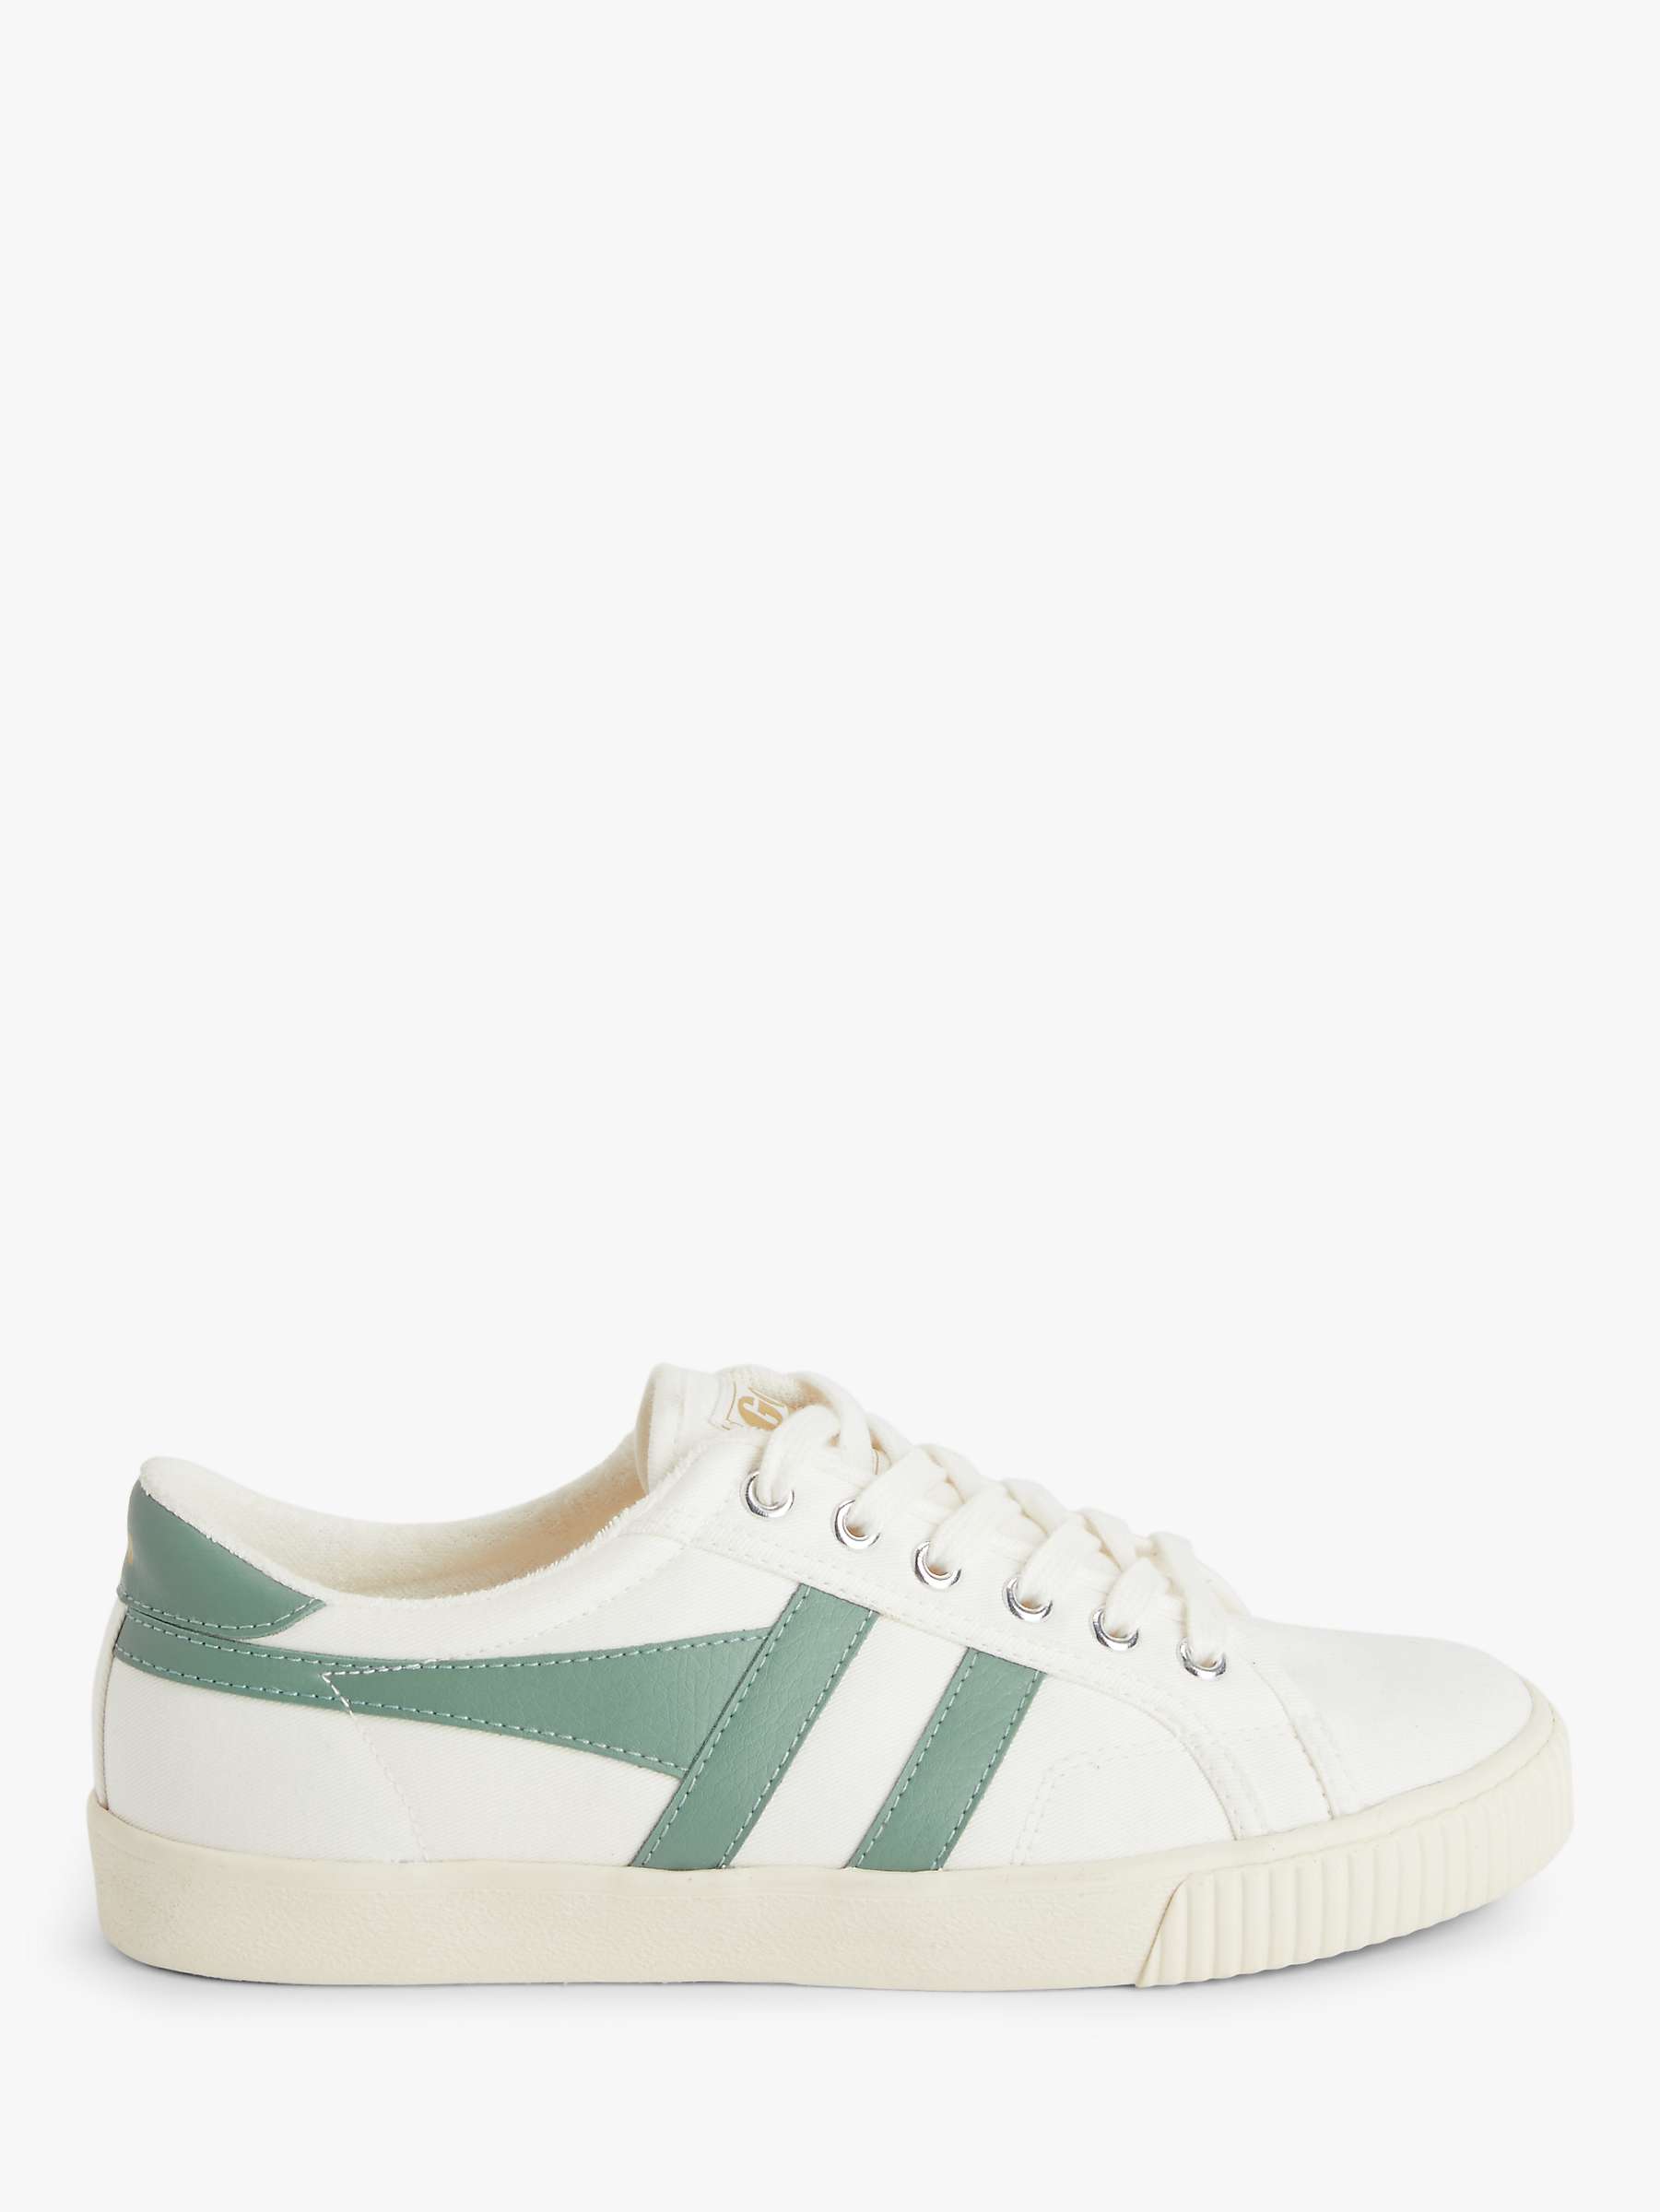 Gola Coaster Low Top Trainers, Green Mist at John Lewis & Partners